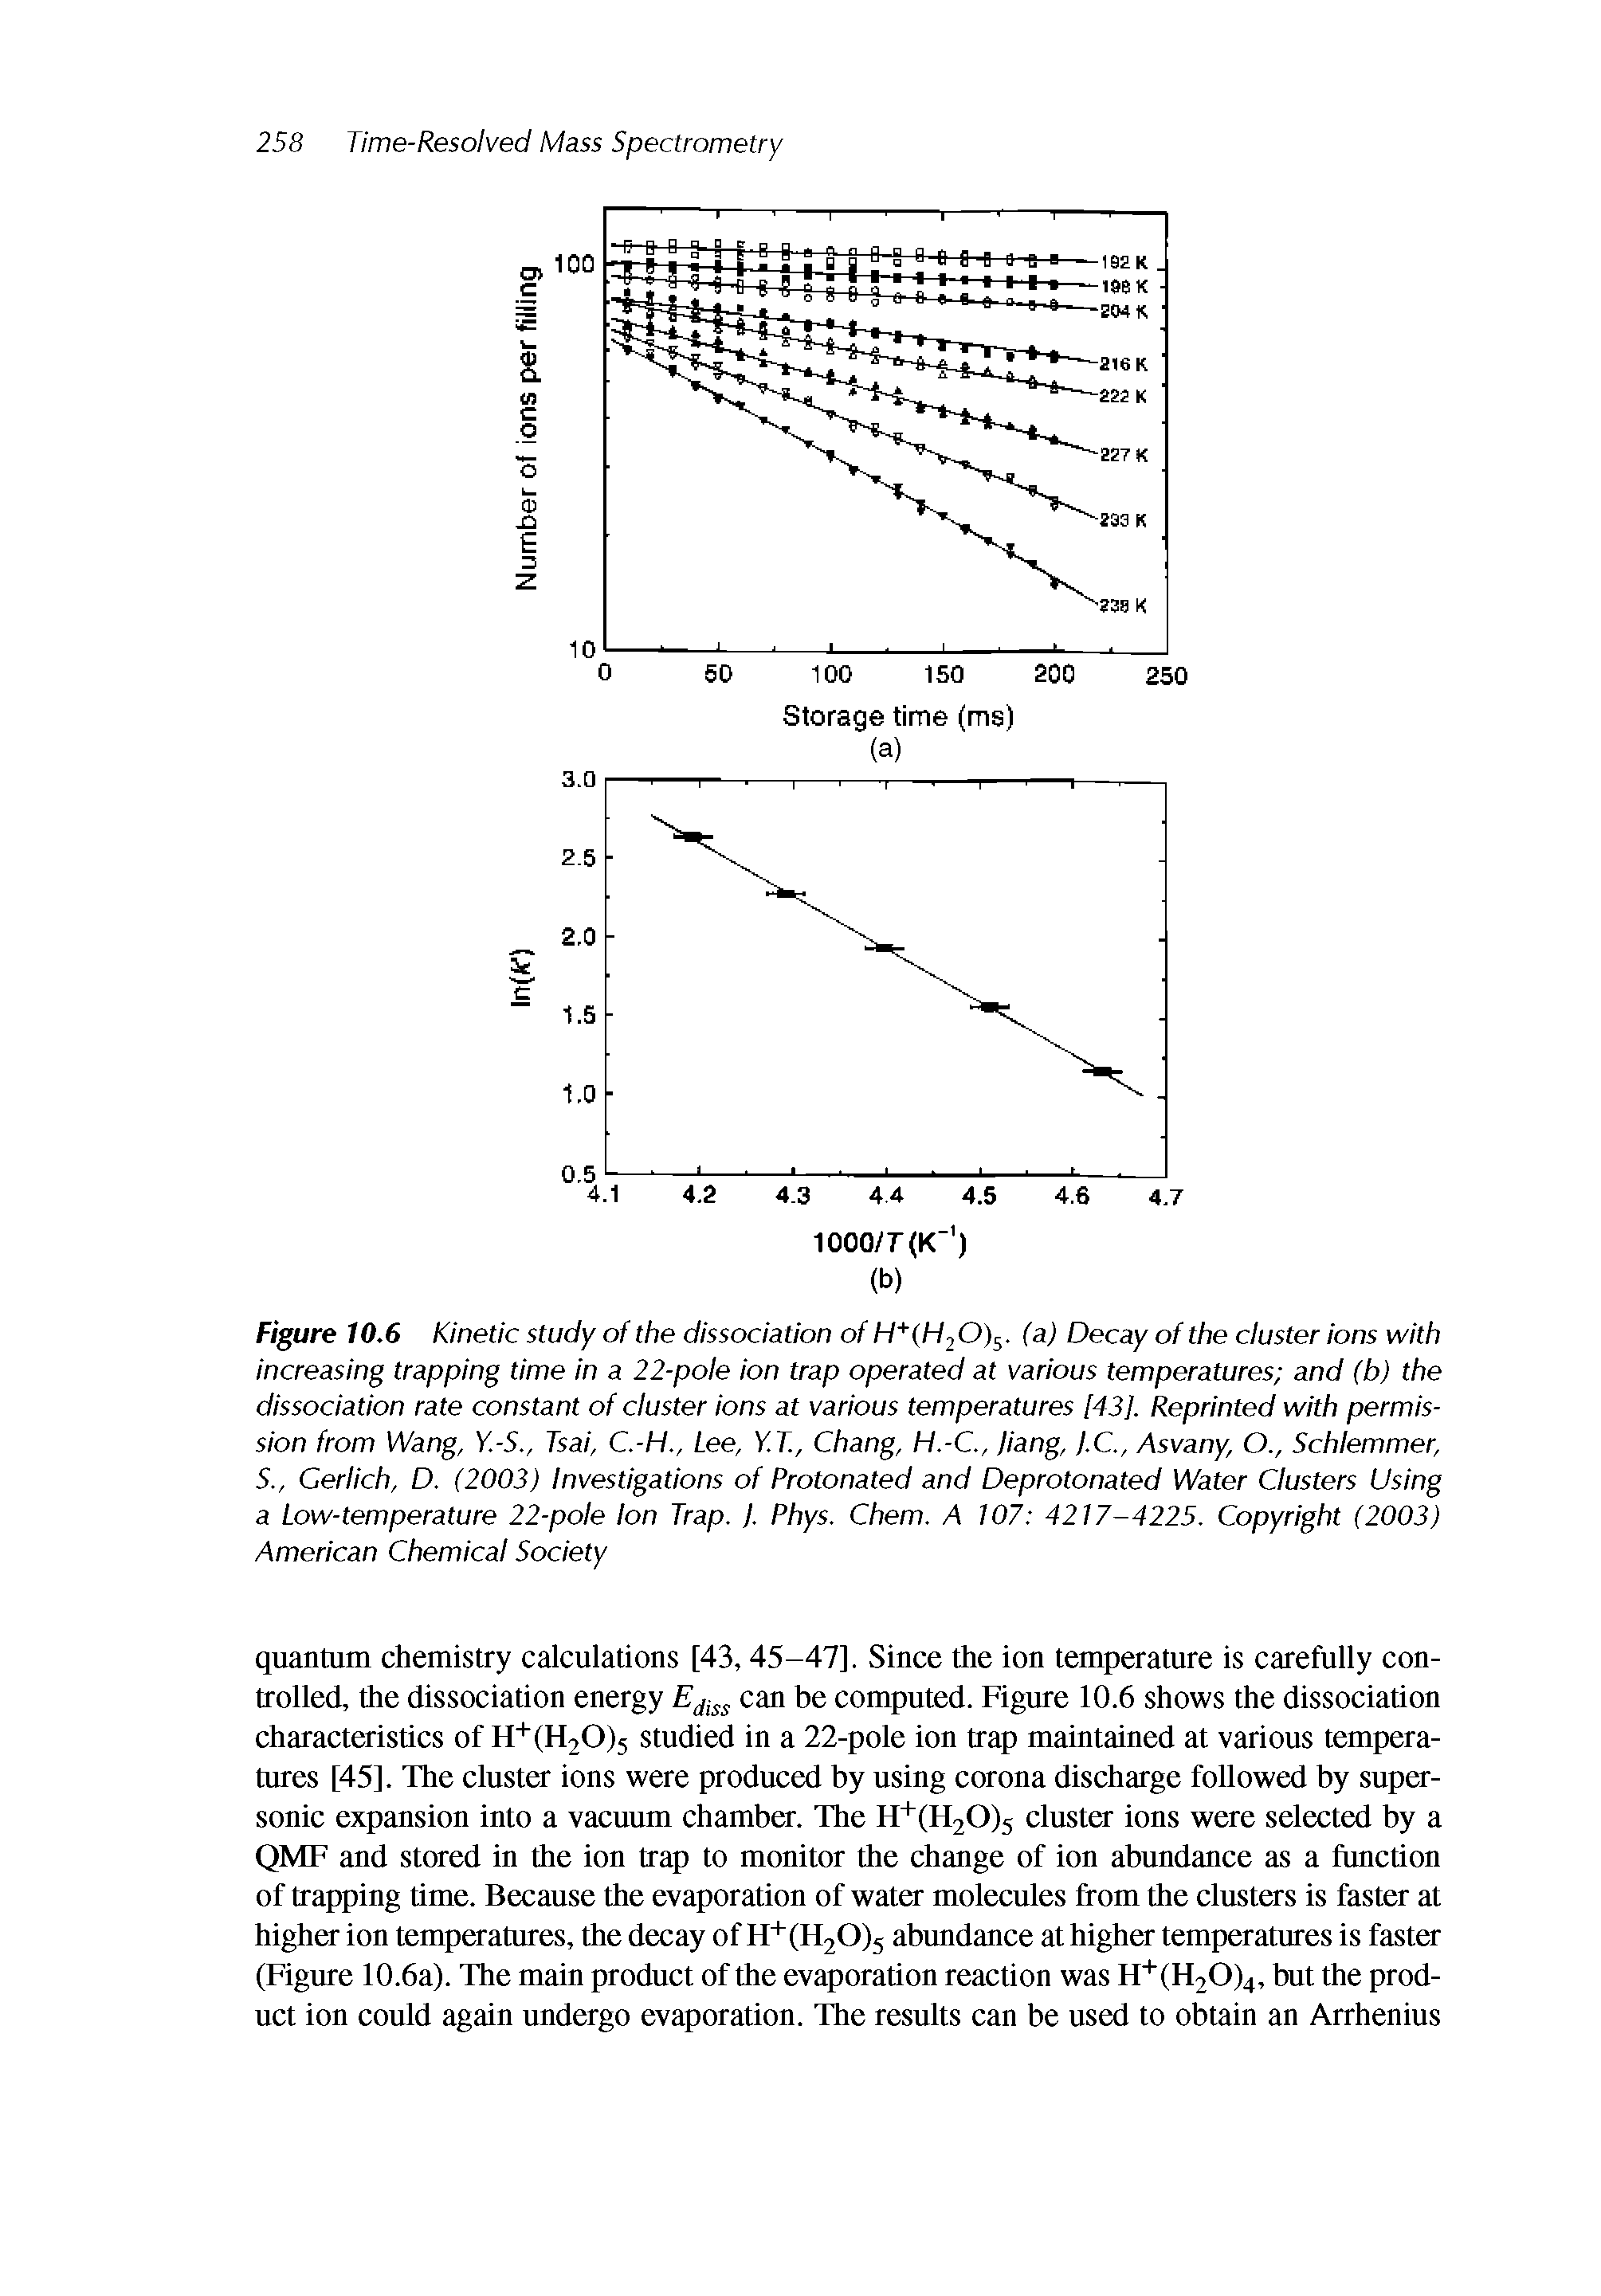 Figure 10.6 Kinetic study of the dissociation of H H20. (a) Decay of the cluster ions with increasing trapping time in a 22-pole ion trap operated at various temperatures and (b) the dissociation rate constant of cluster ions at various temperatures [43]. Reprinted with permission from Wang, Y.-S., Tsai, C.-H., Lee, Y.T., Chang, H.-C., Jiang, ].C., Asvany, O., Schlemmer, S., Cerlich, D. (2003) Investigations of Protonated and Deprotonated Water Clusters Using a Low-temperature 22-pole Ion Trap. j. Phys. Chem. A 107 4217-4225. Copyright (2003) American Chemical Society...